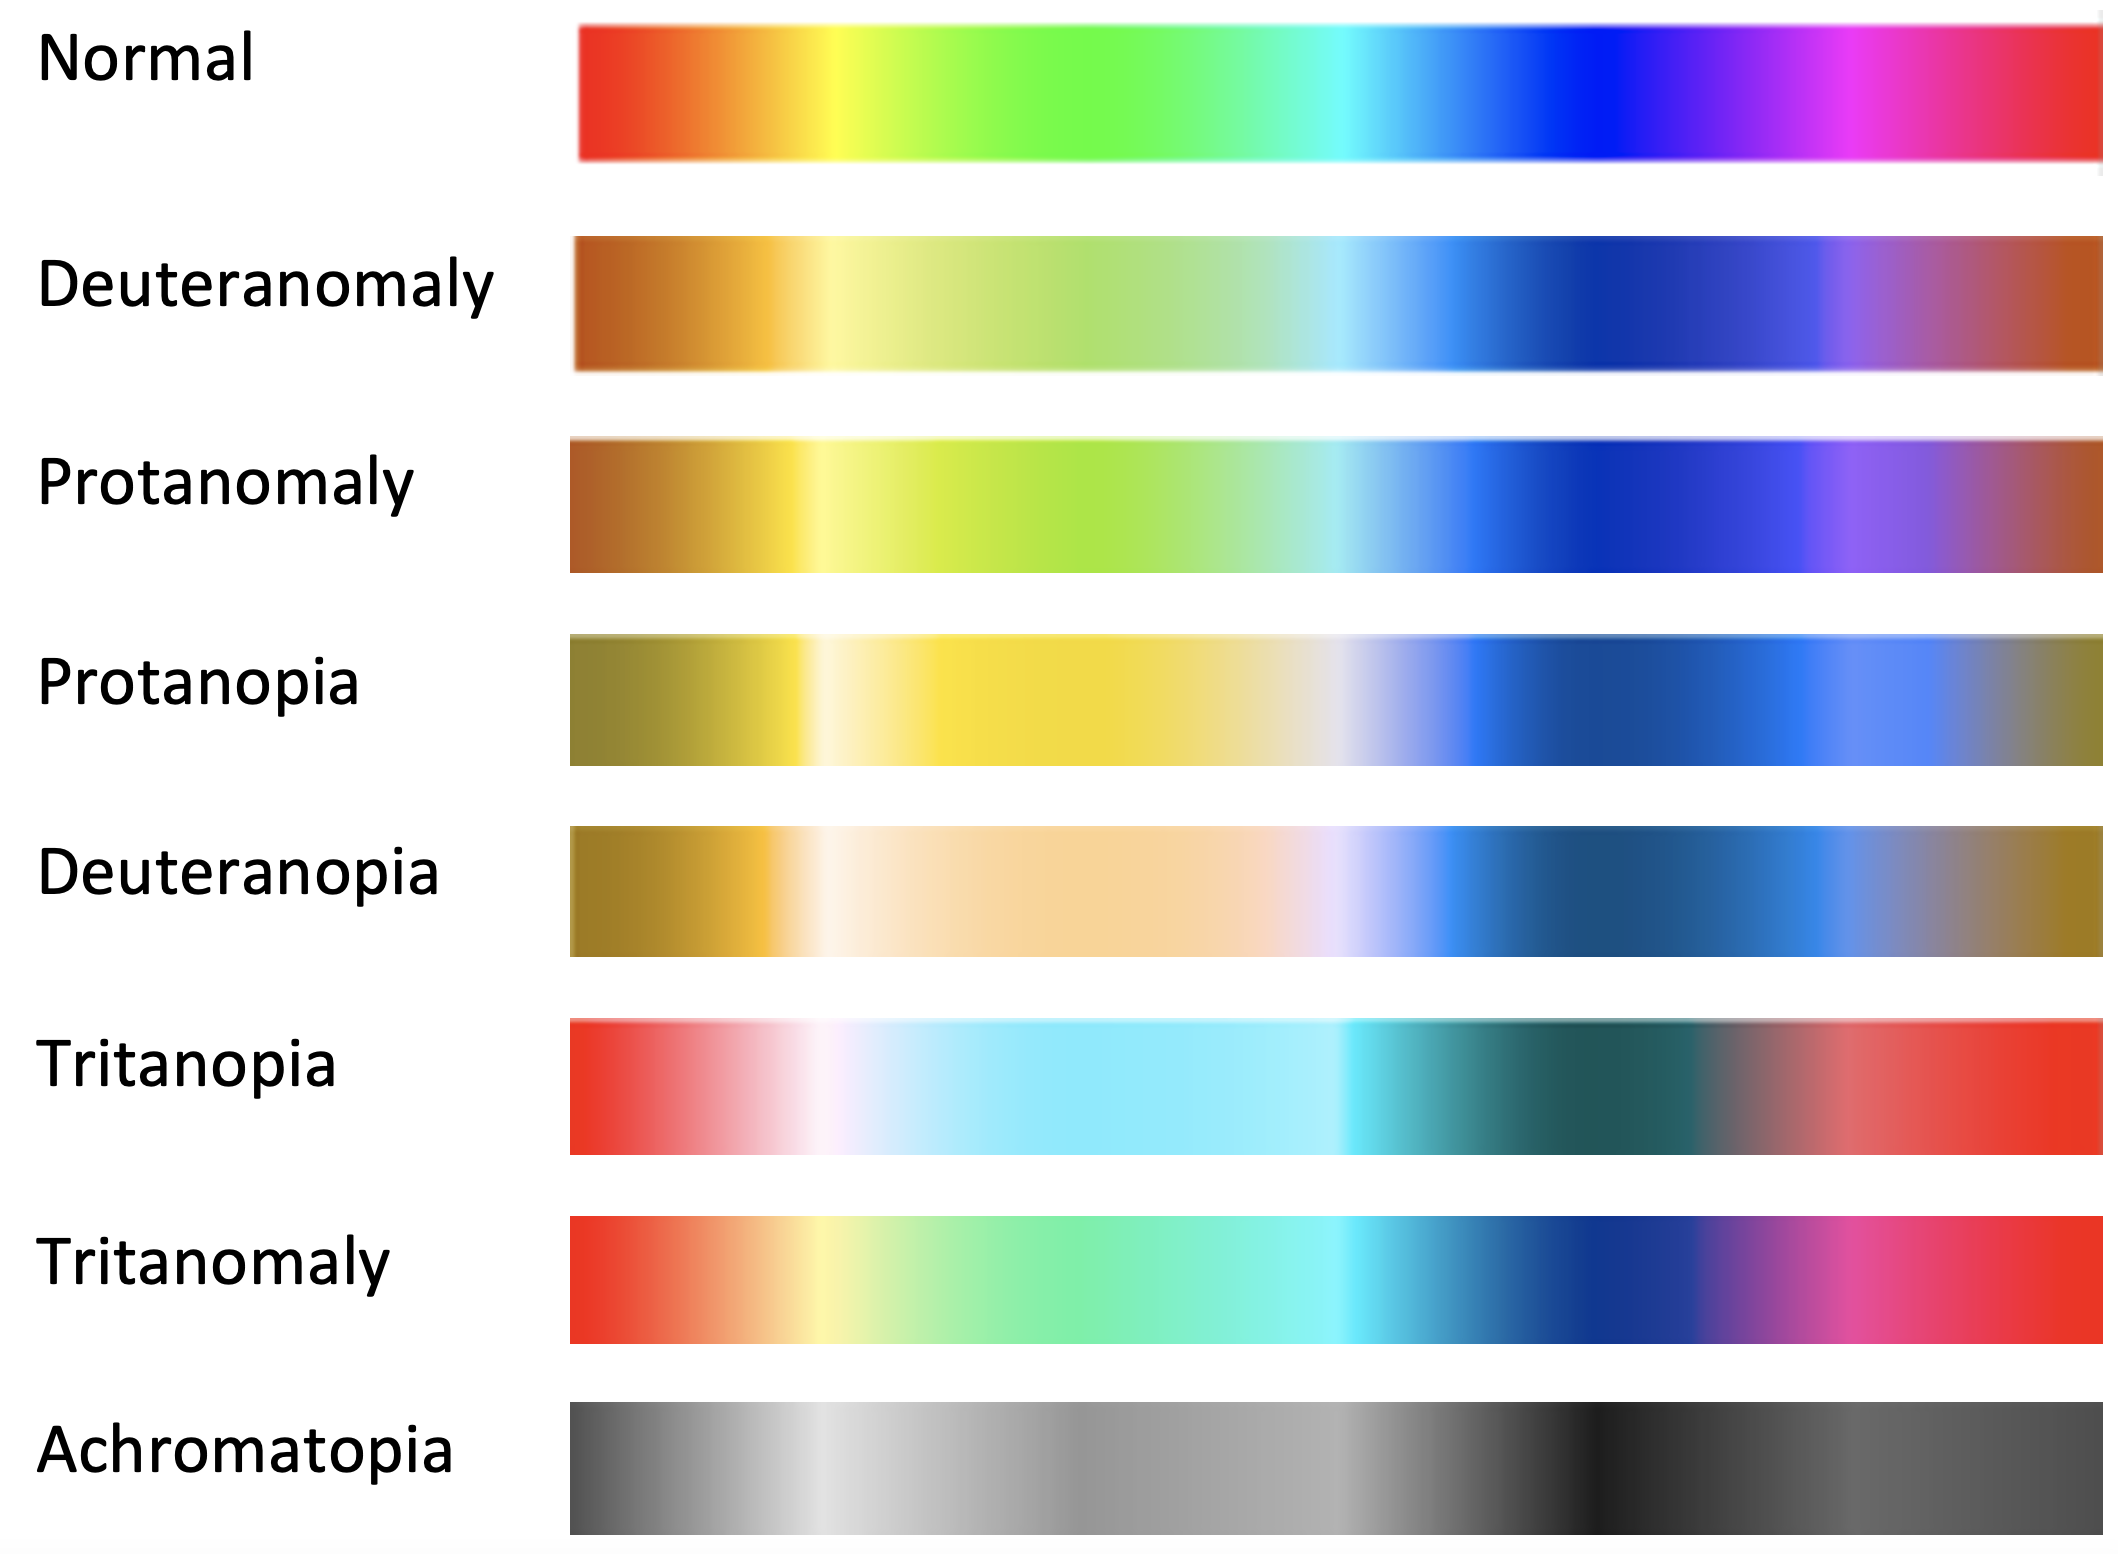 An infographic on how people perceive color, according to what type of color impairment they have